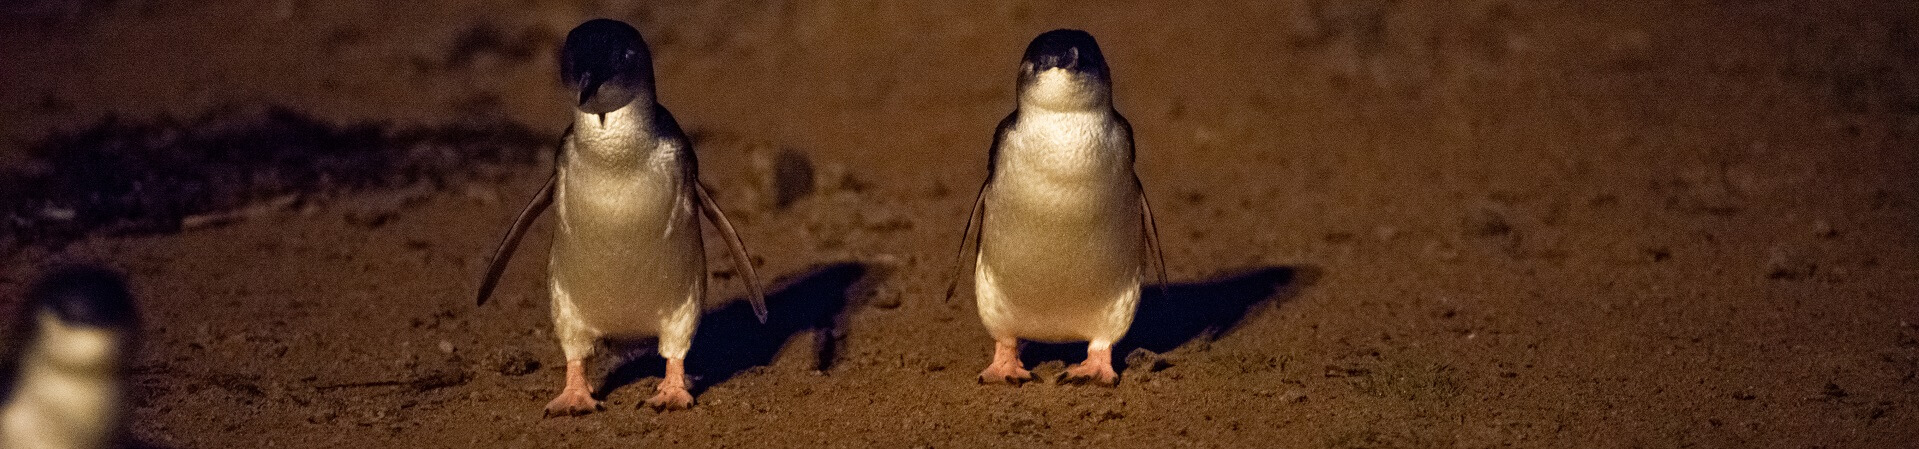 Do you need to book for the Penguin Parade?